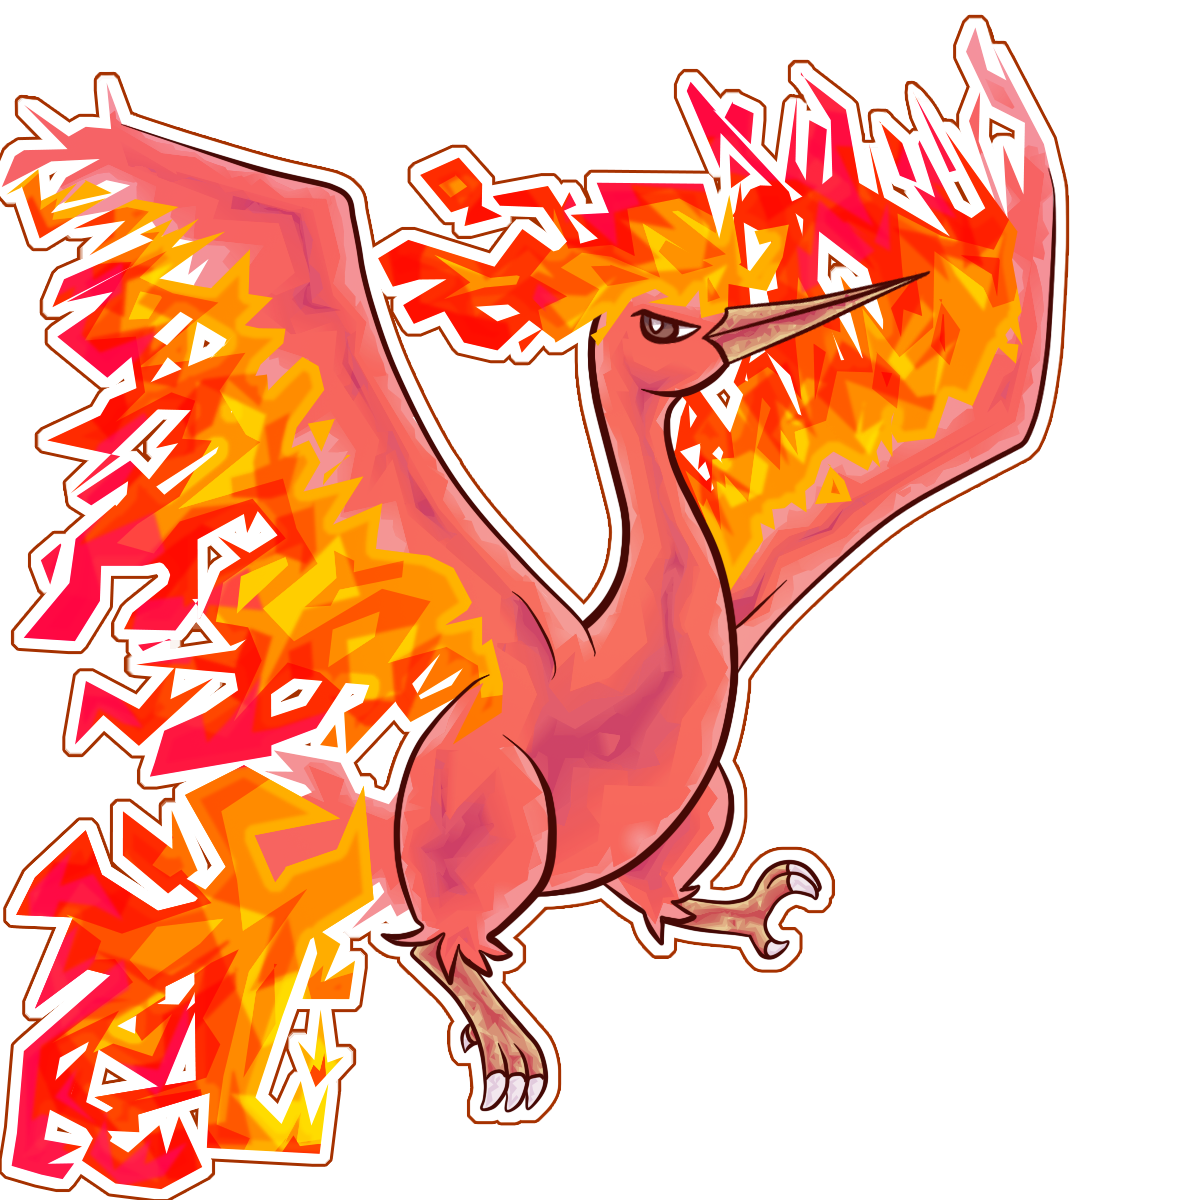 The Team Blaze mascot is here! Shiny Moltres found on Yellow